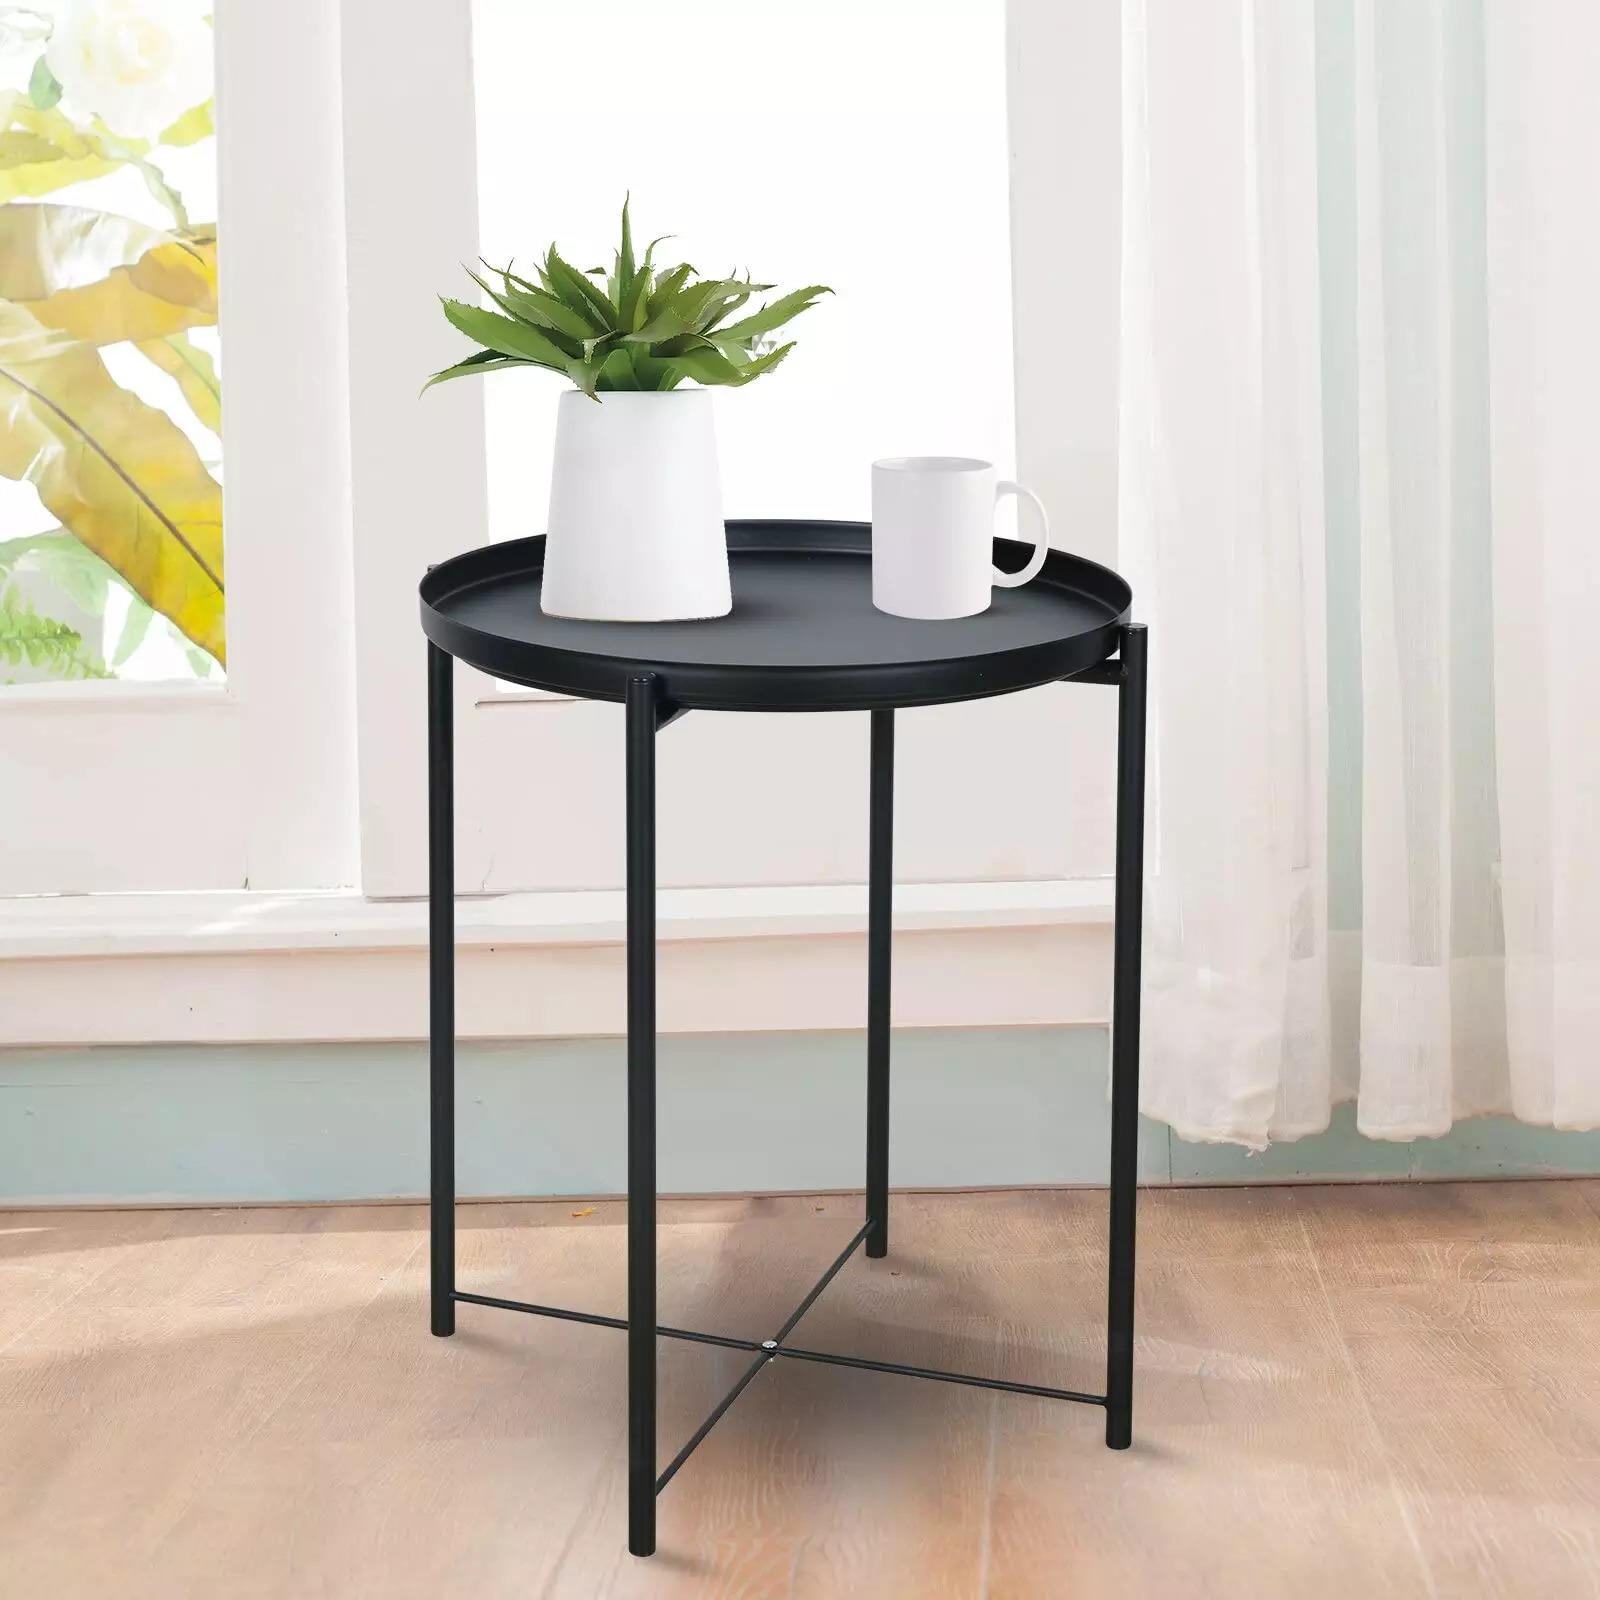 Best side tables under 2000 for modern and stylish rooms:Image